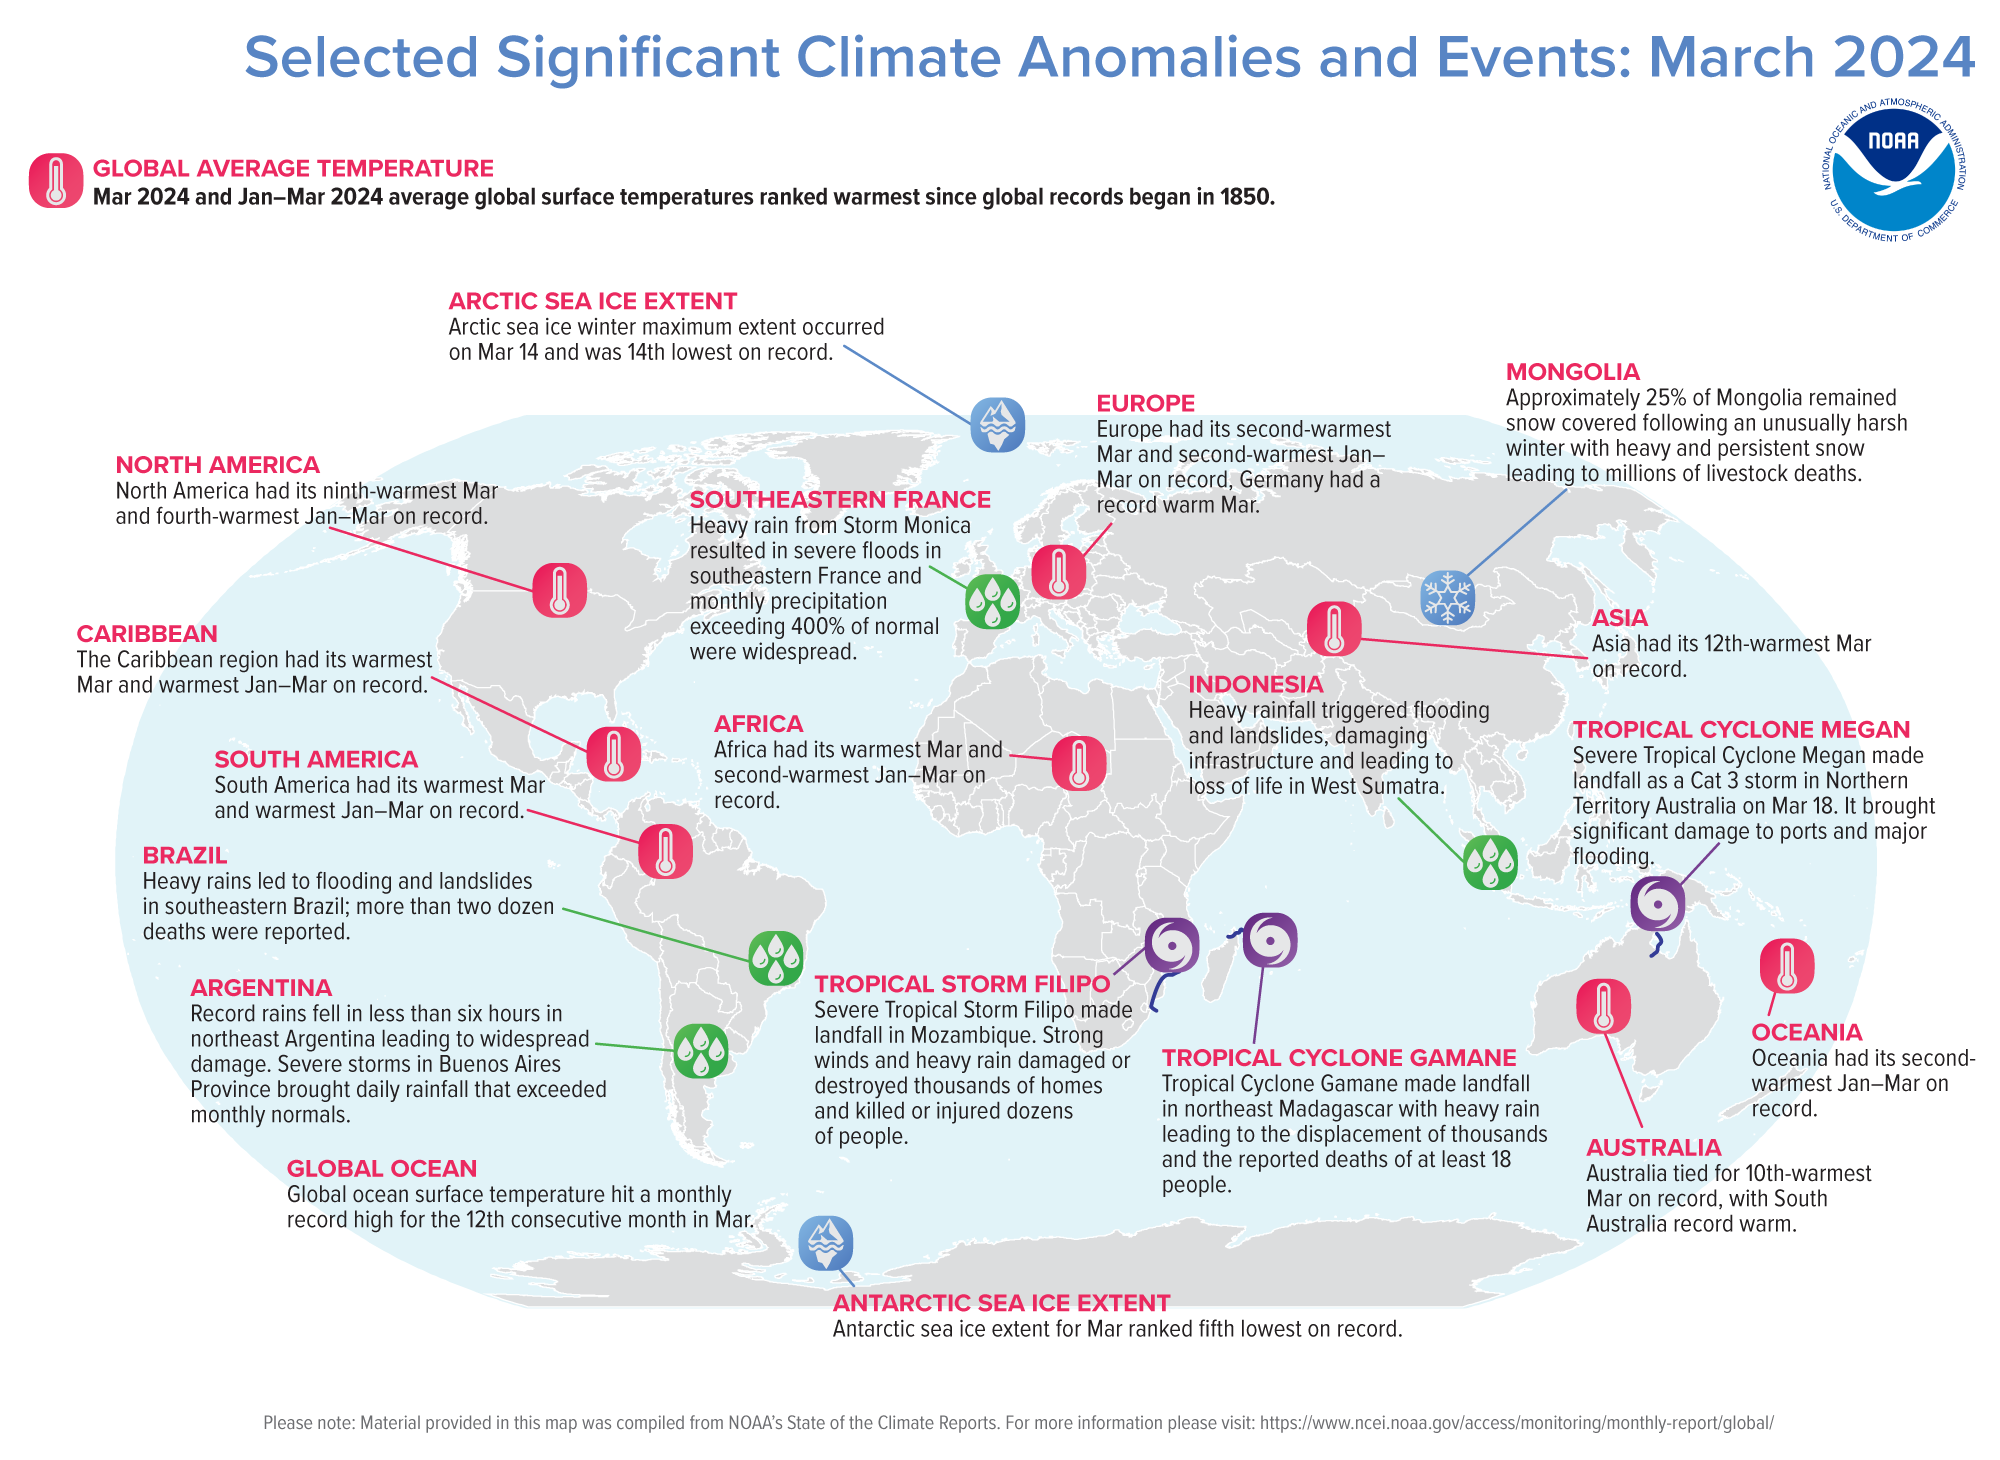 Map of the world showing locations of significant climate anomalies and events in March 2024 with text describing each event and title at top stating "Selected Significant Climate Anomalies and Events: March 2024".